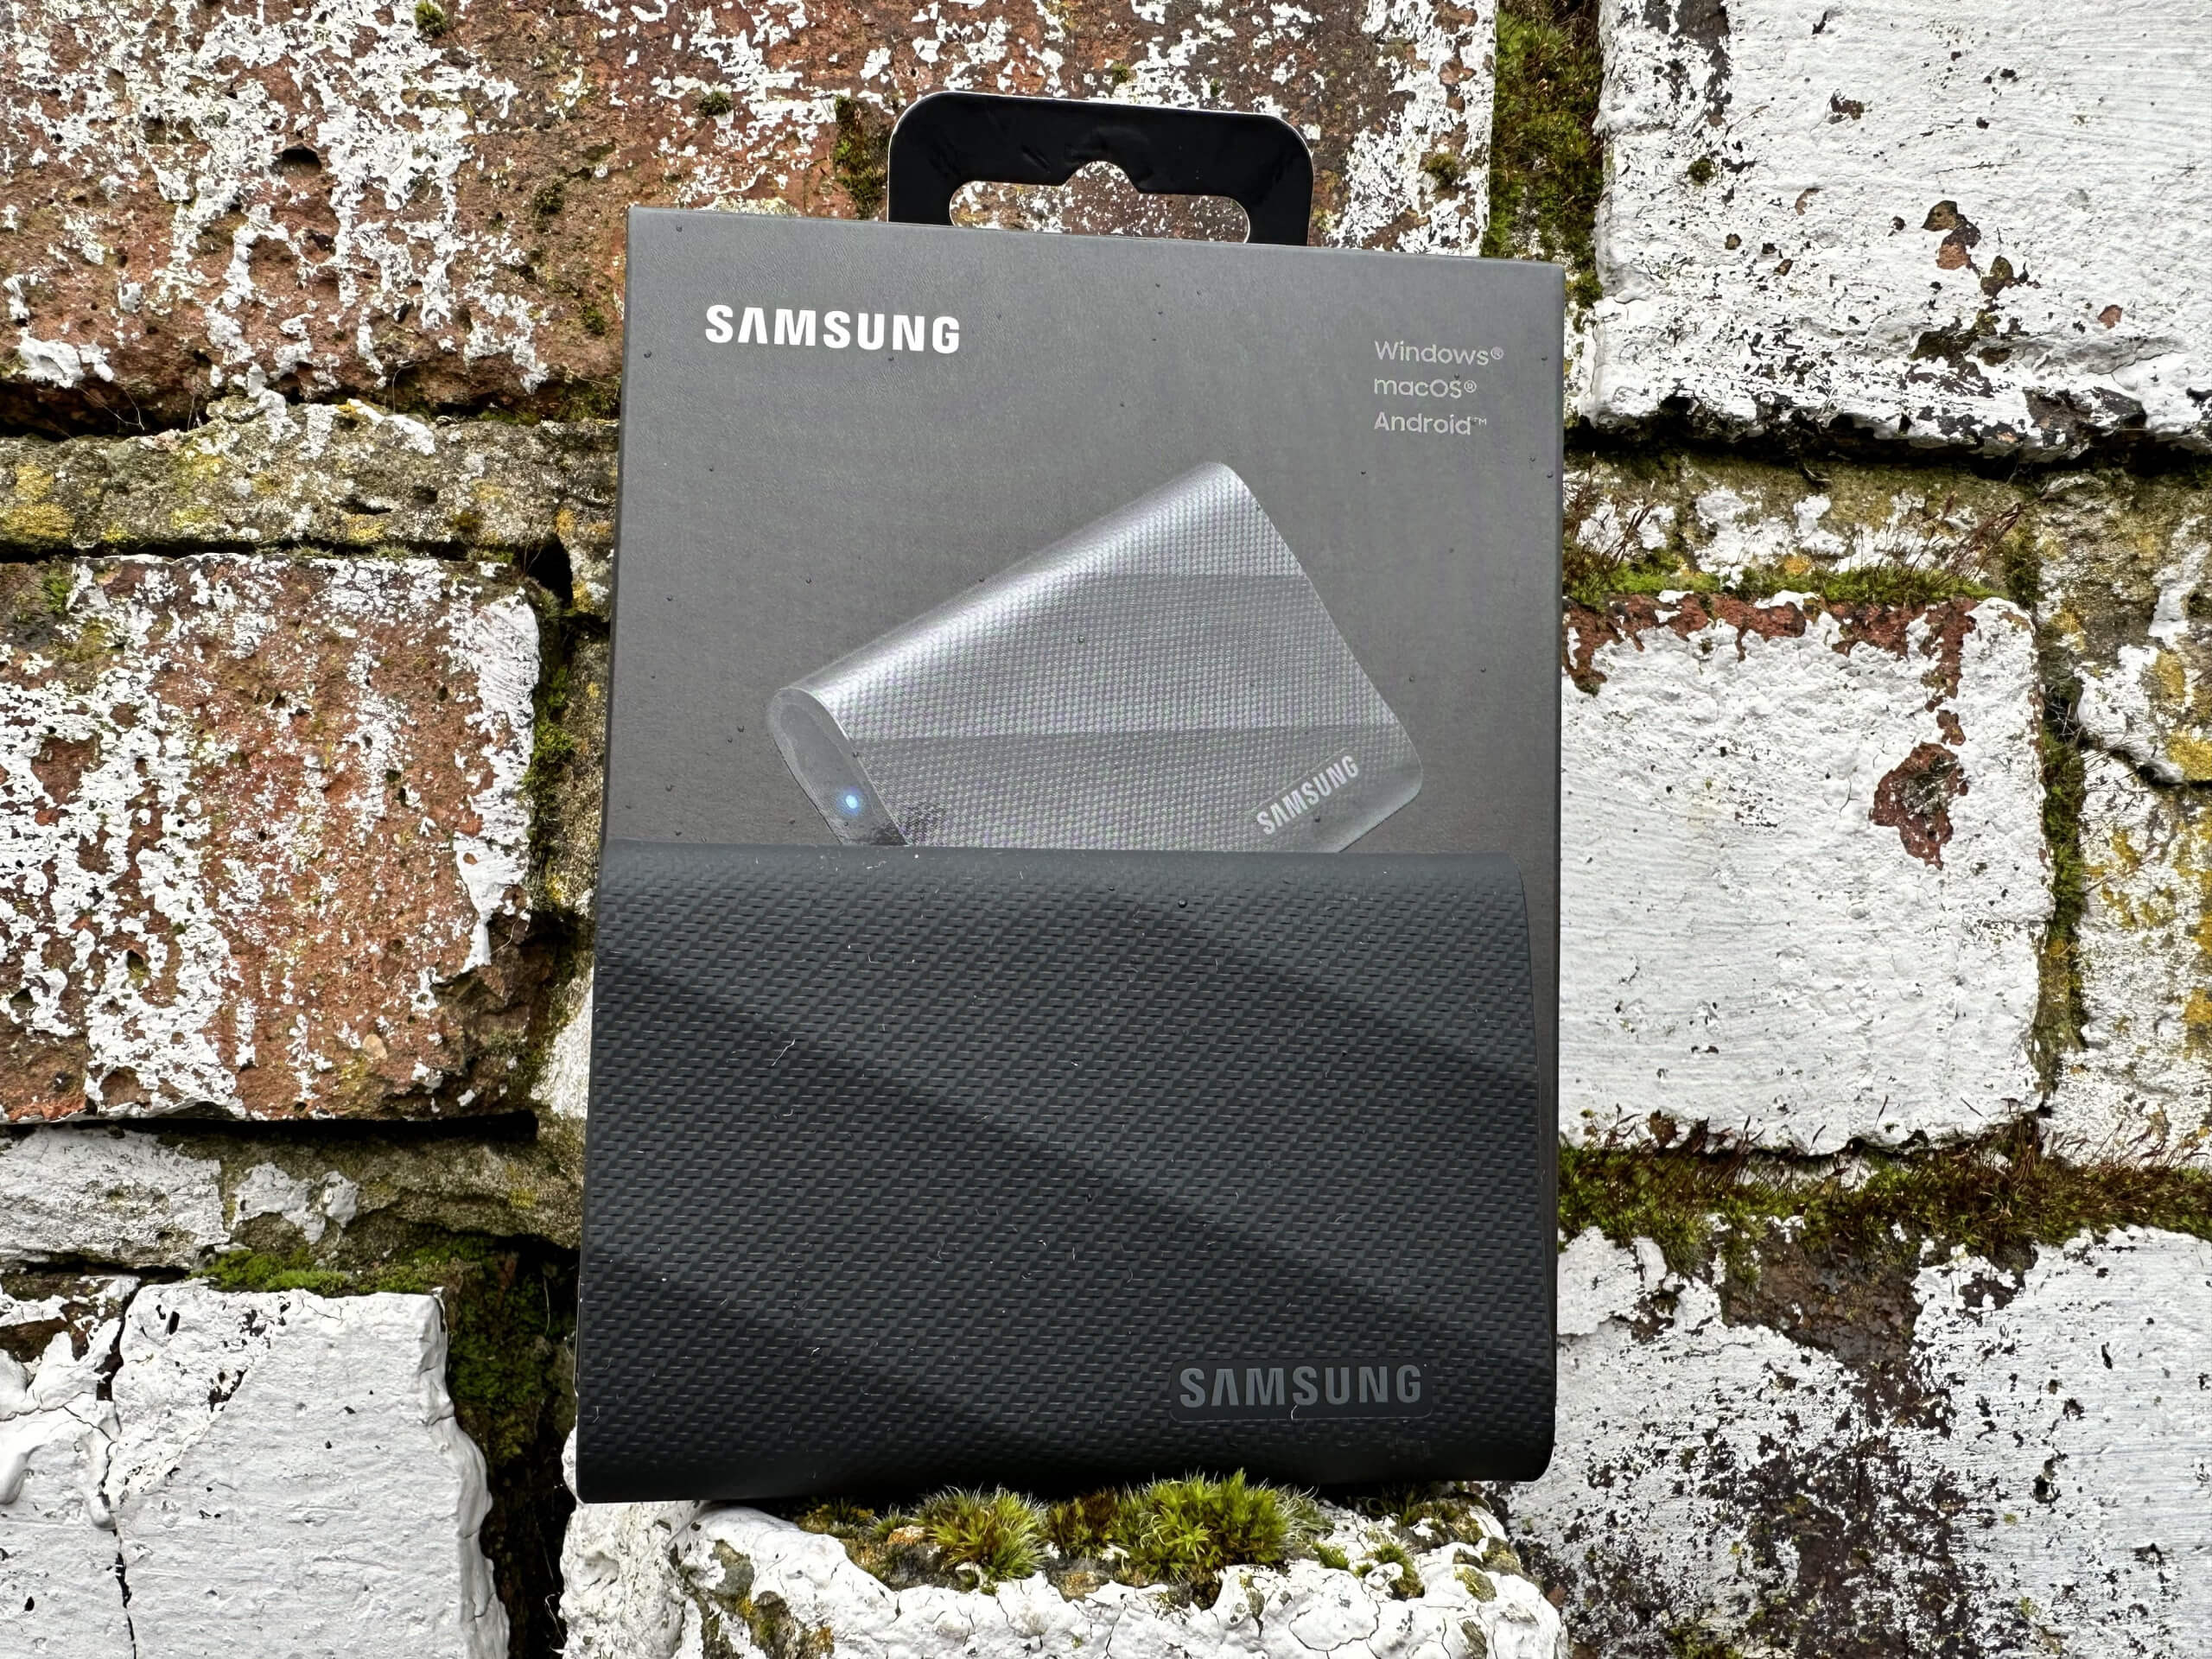 samsung t9 portable ssd unboxed sitting on a post in front of the box showing details of the ssd.